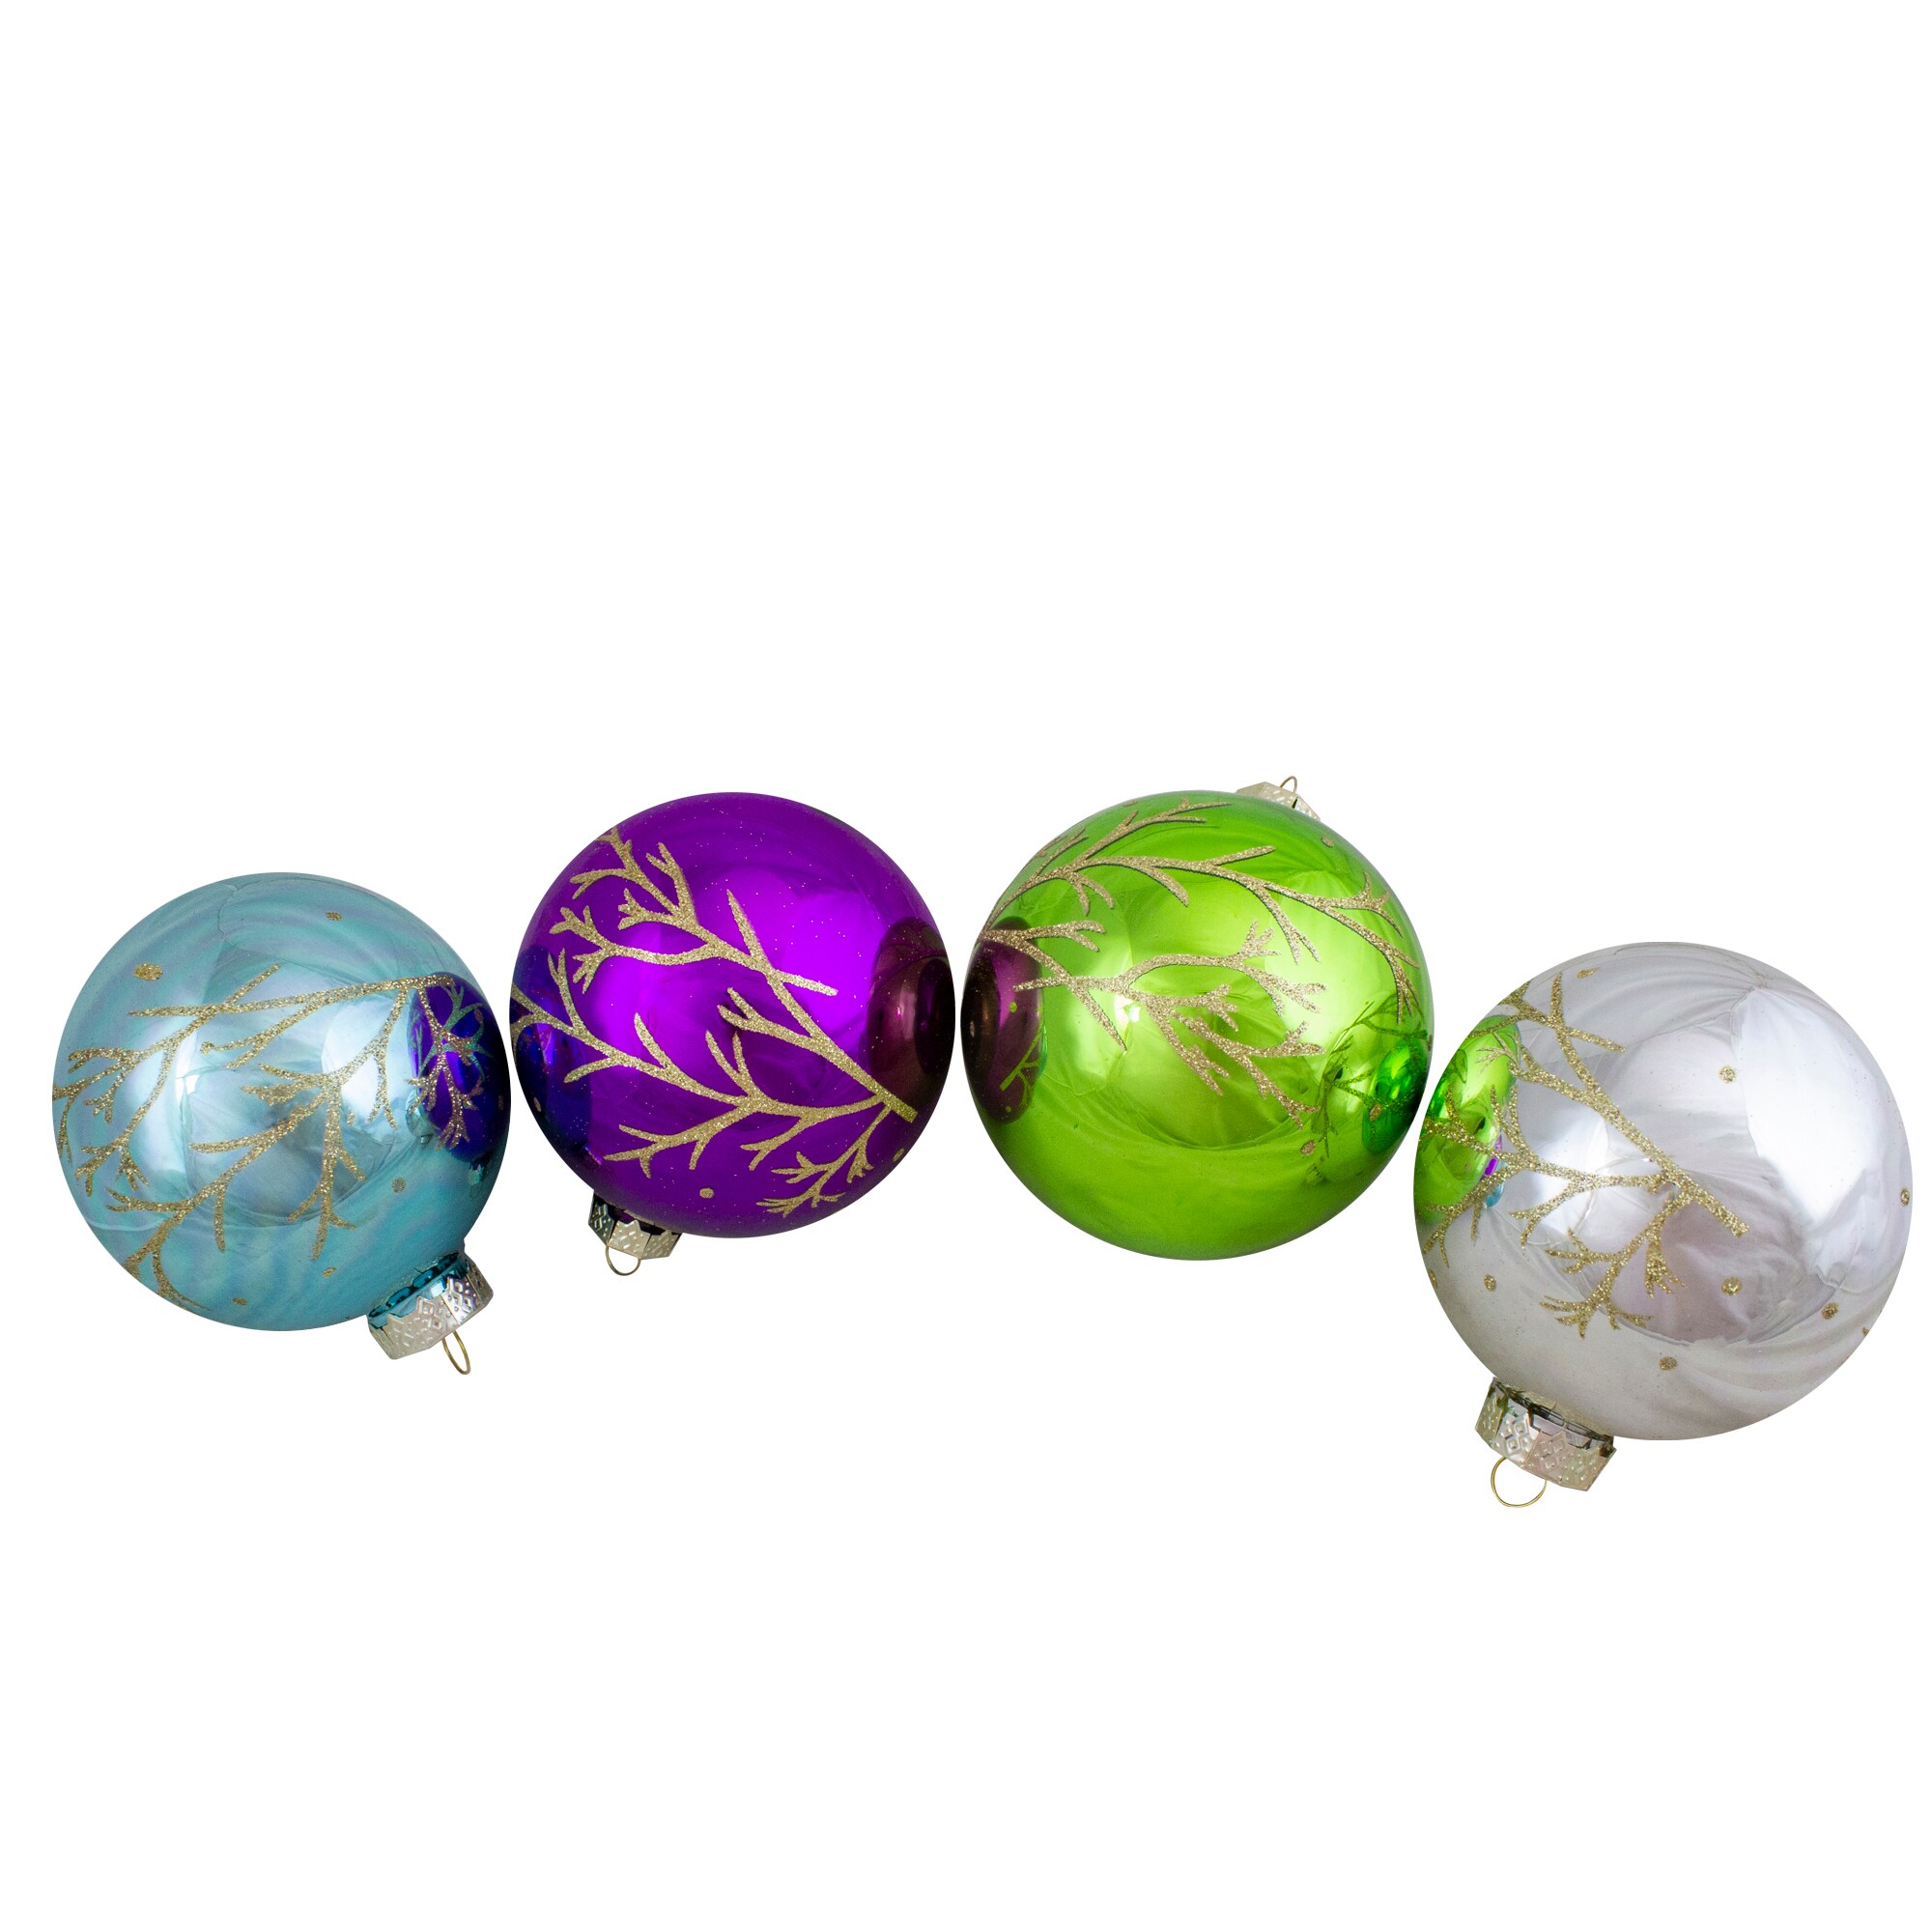 Northlight 4.5 in. Clear Glass Merry Christmas Glass Ball Ornament